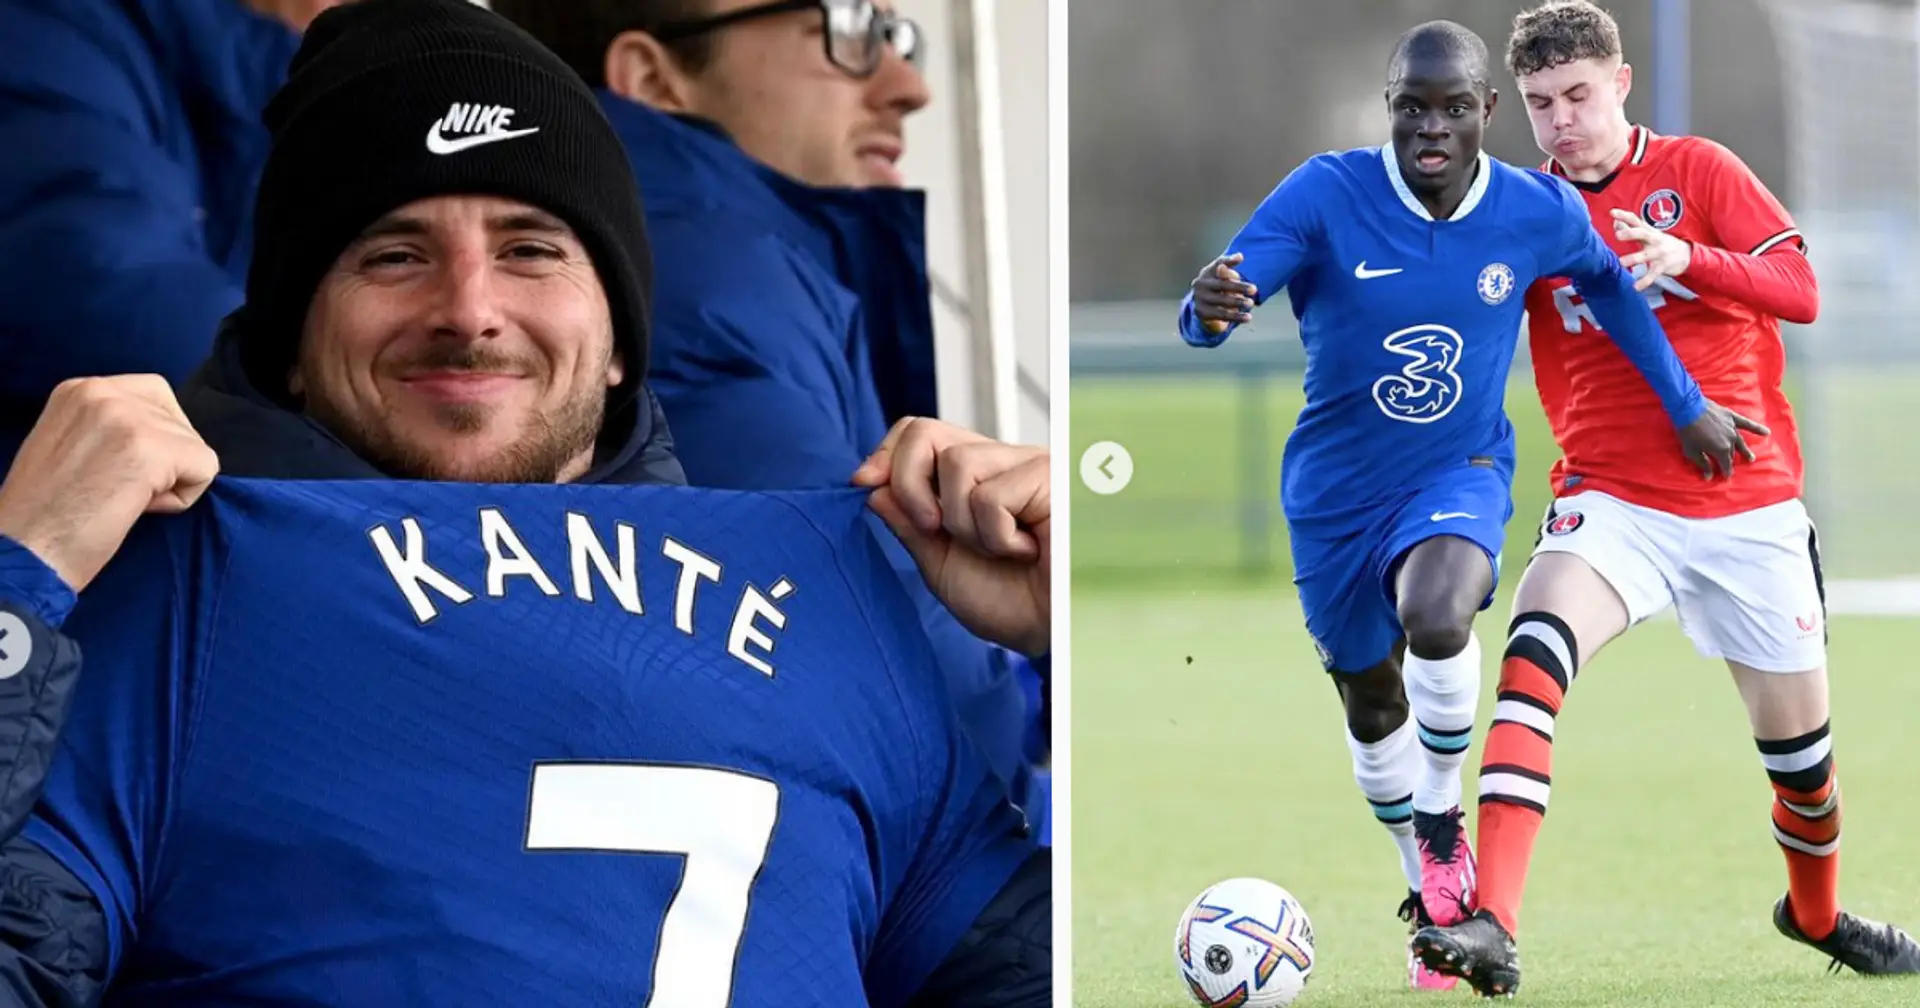 'He's back': Mount reacts as he watches Kante's first match since August 